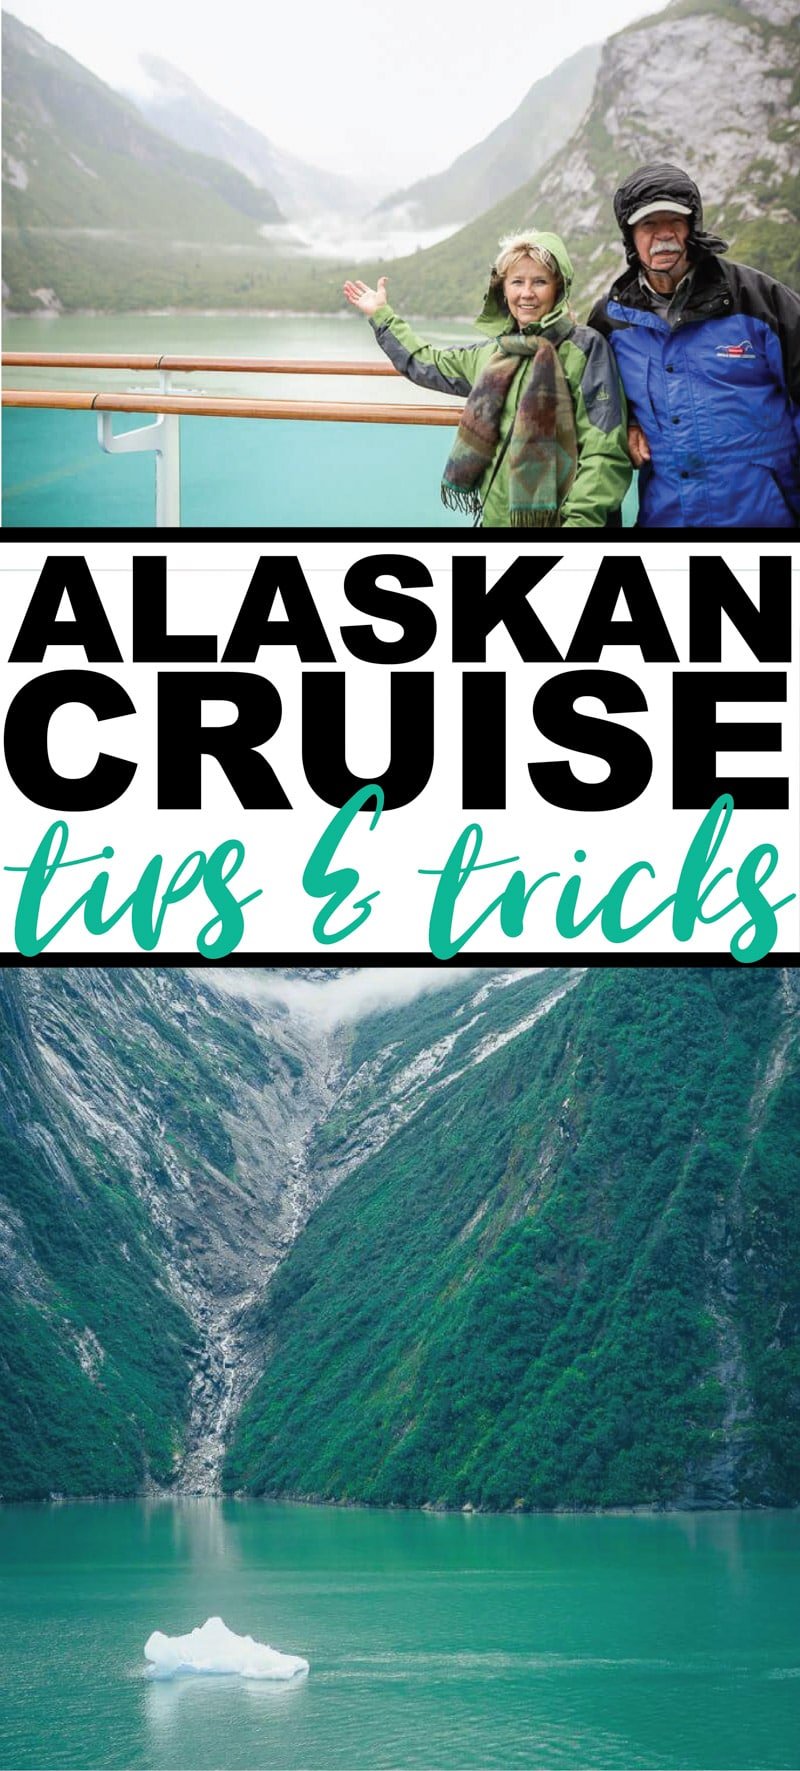 Must-read tips for an Alaskan cruise! Everything from a packing guide (with outfits recommendations), the best excursions, best cruise line, and more! So helpful whether you’re doing Princess, Carnival, or a Royal Caribbean cruise with kids OR adults!